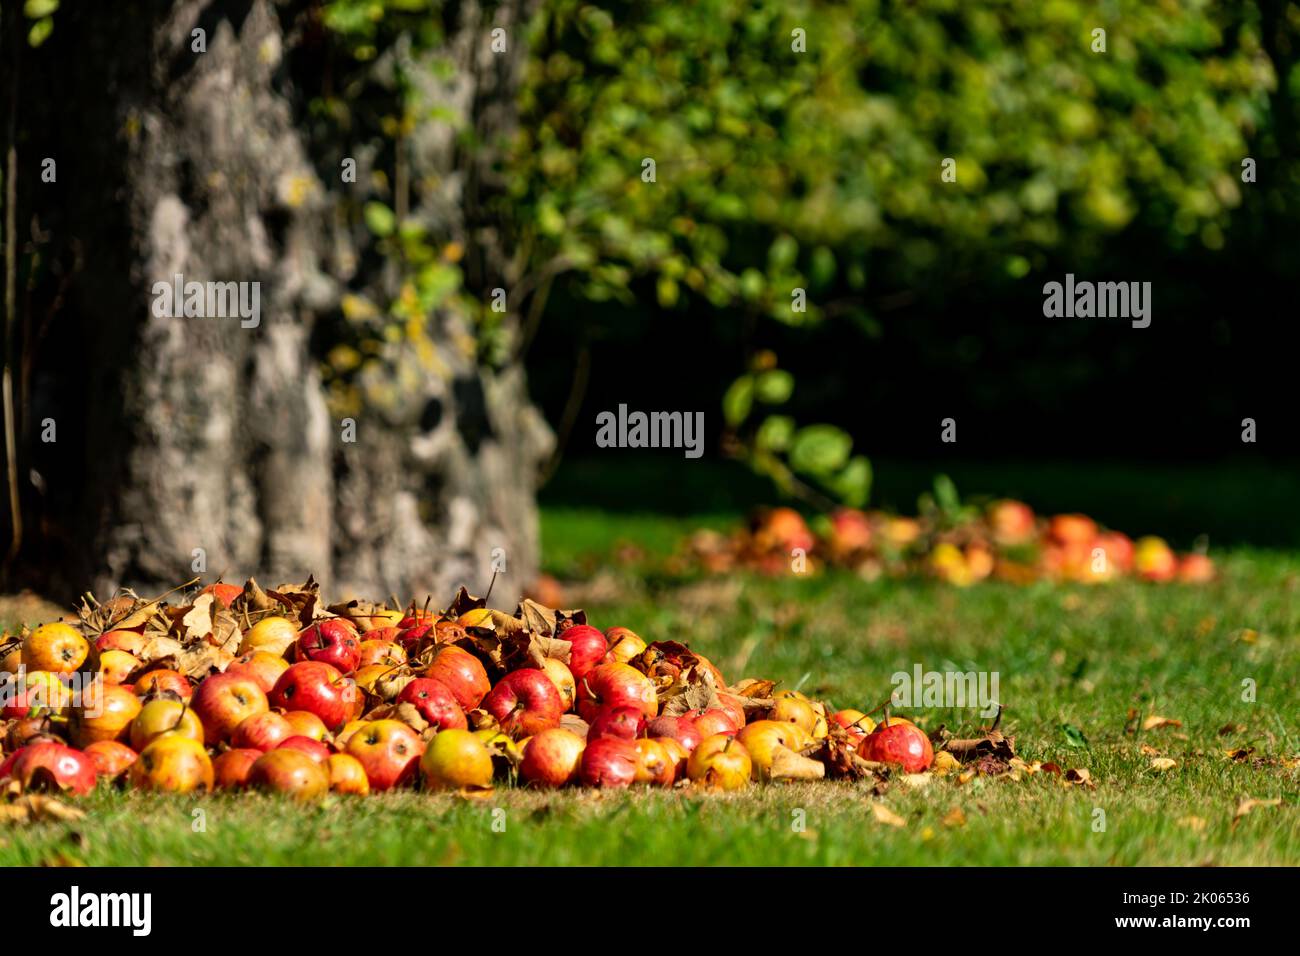 Piles of fallen apples on a lawn at the foot of an old apple tree Stock Photo